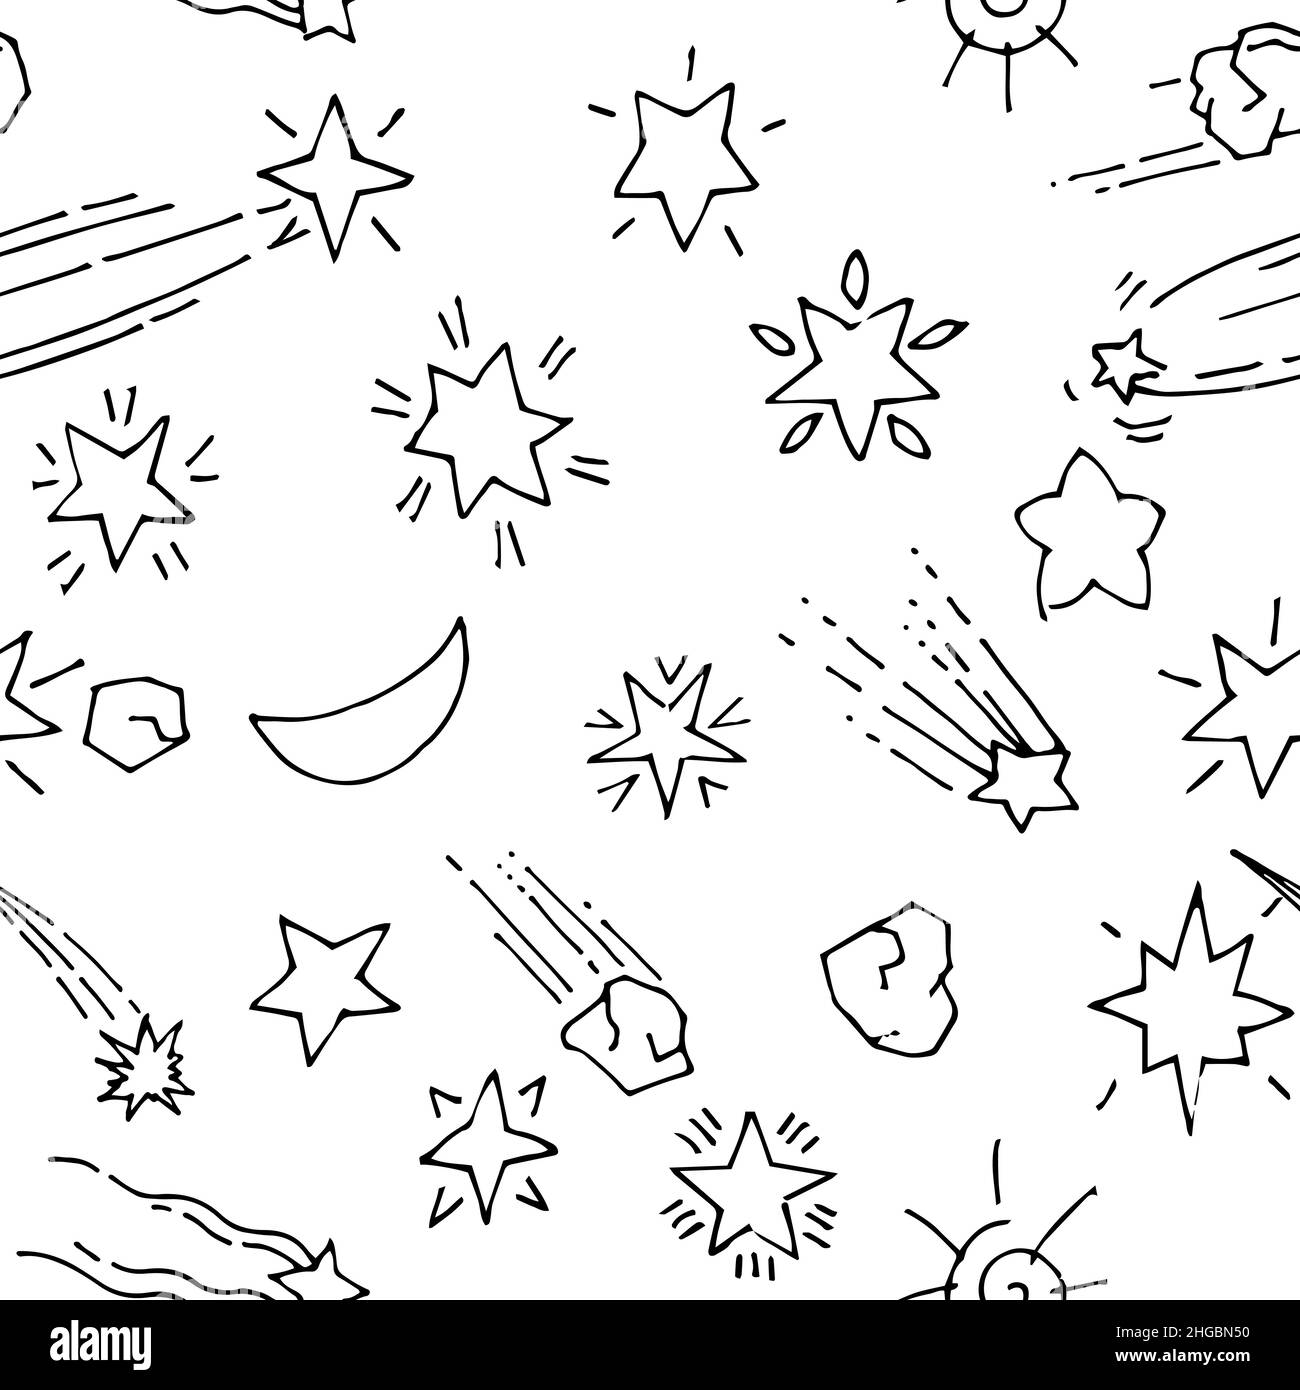 Simple Seamless Vector Hand Draw Sketch Black and White Doodle